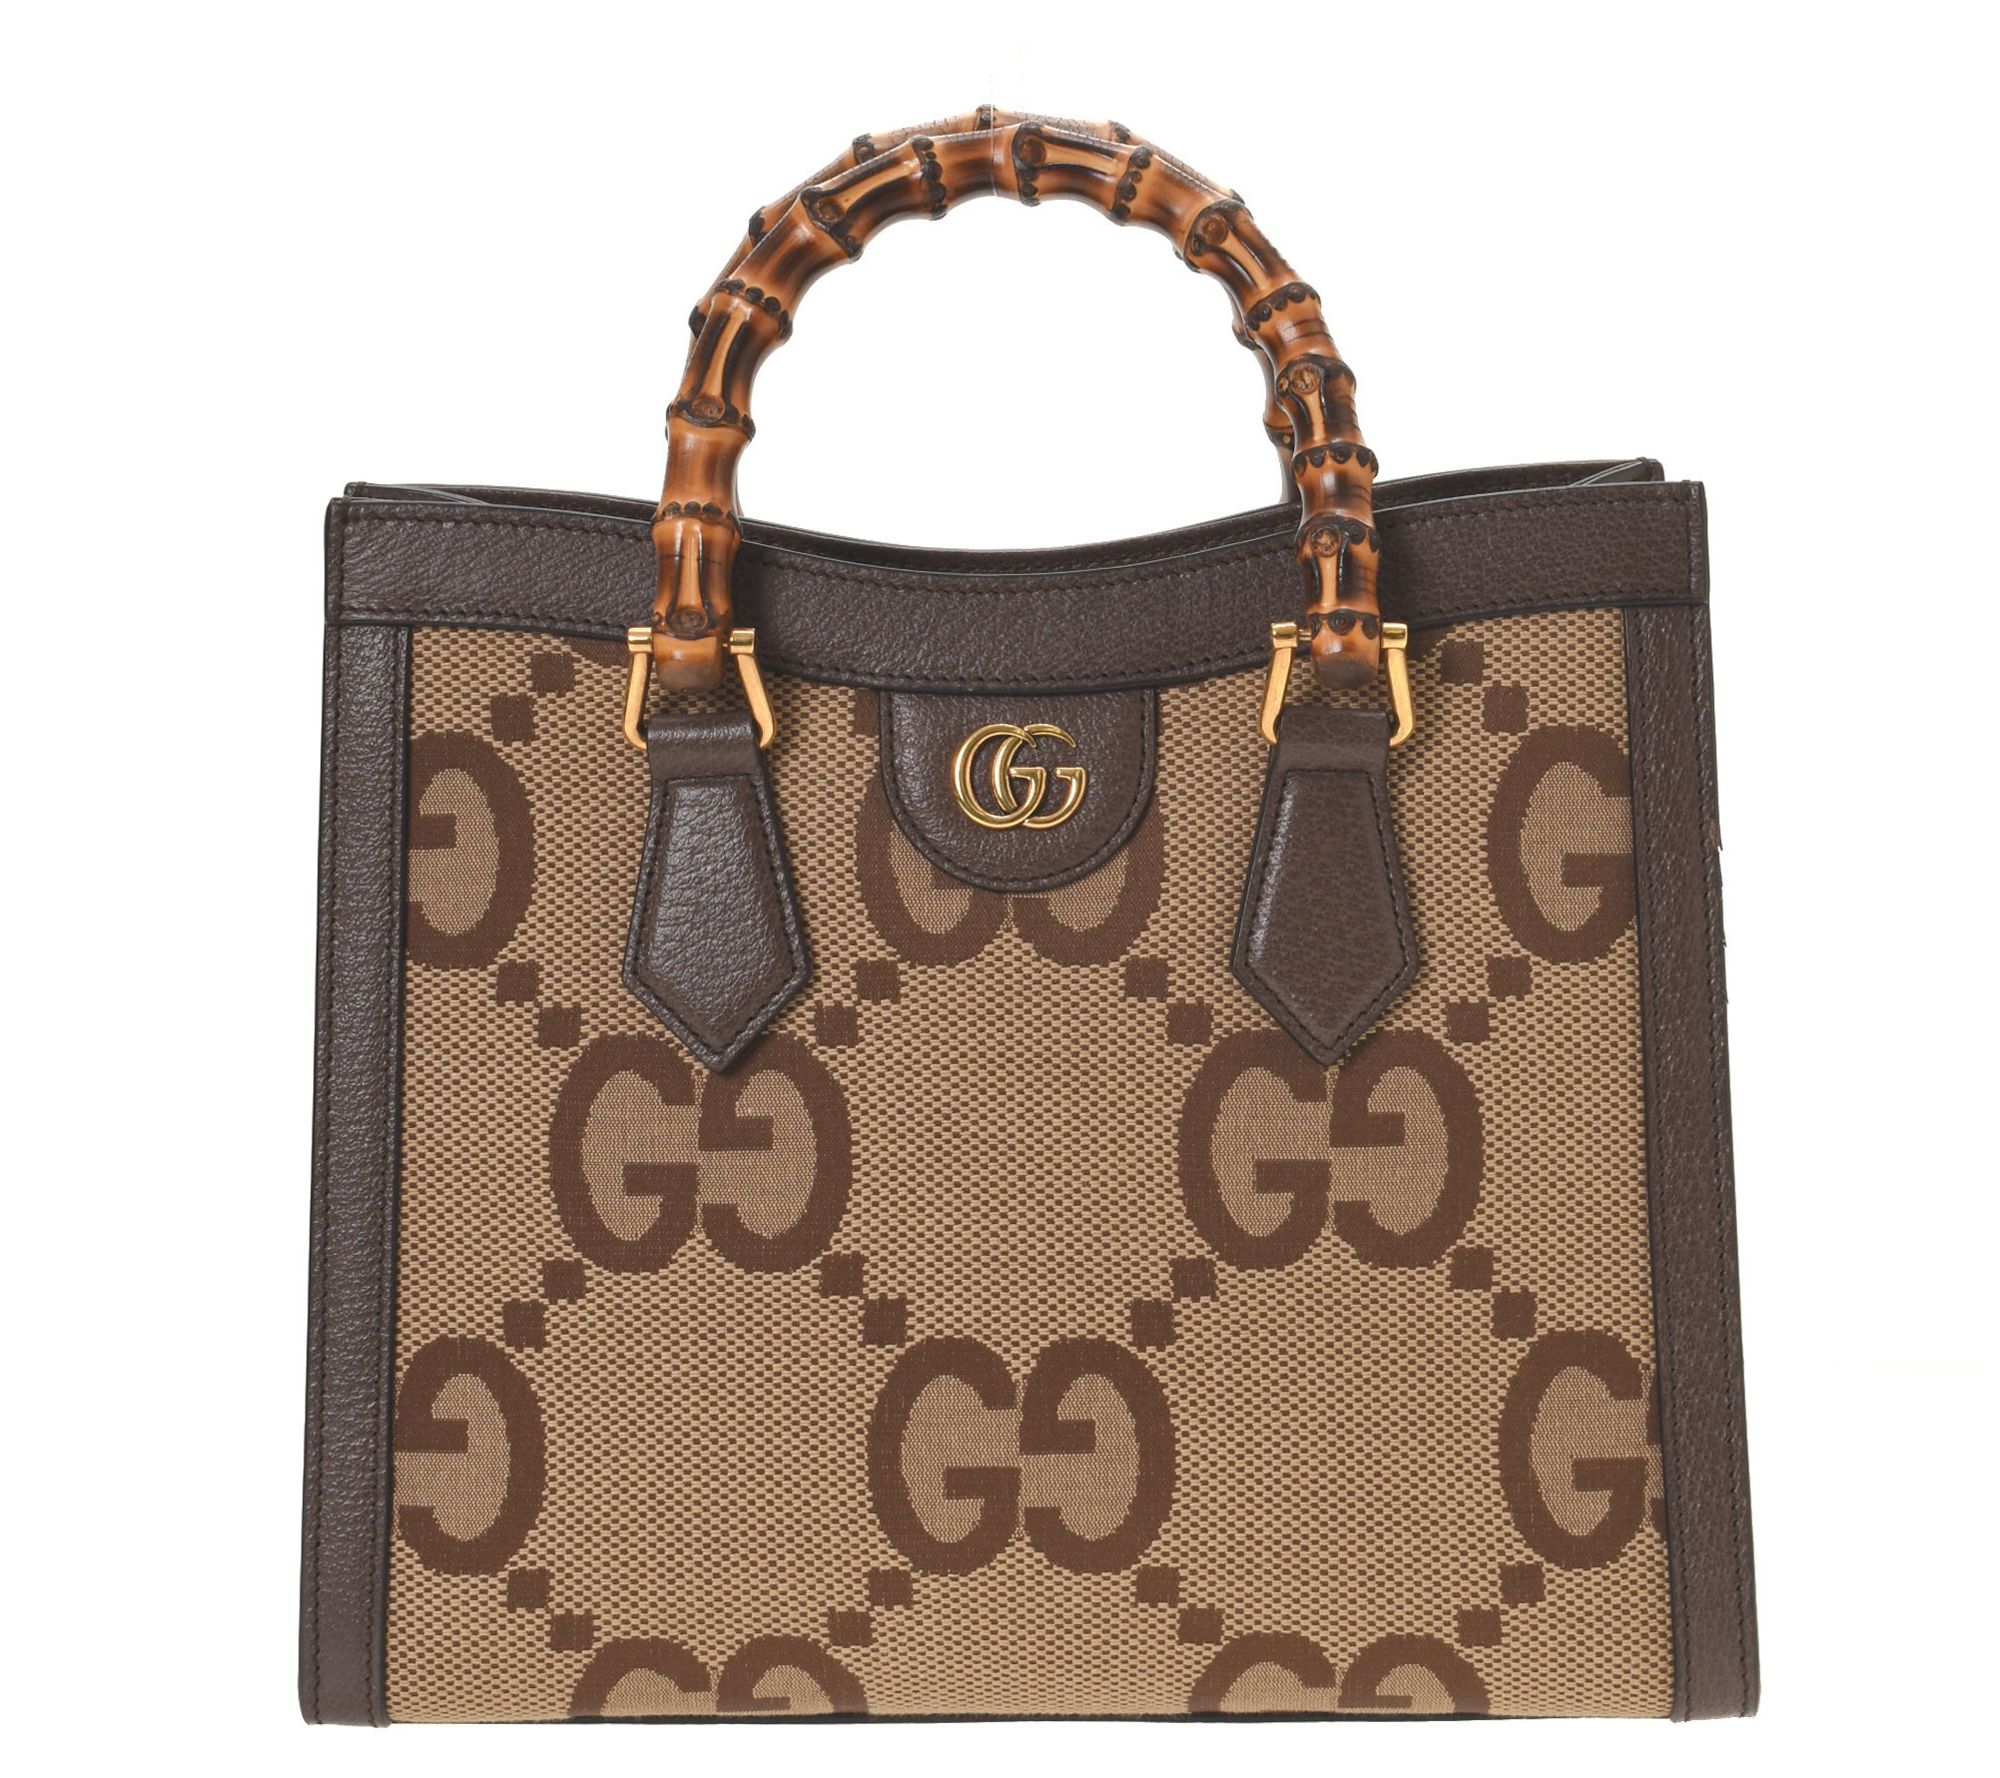 11 Best Gucci Tote Bags : Diana, Ophidia & More